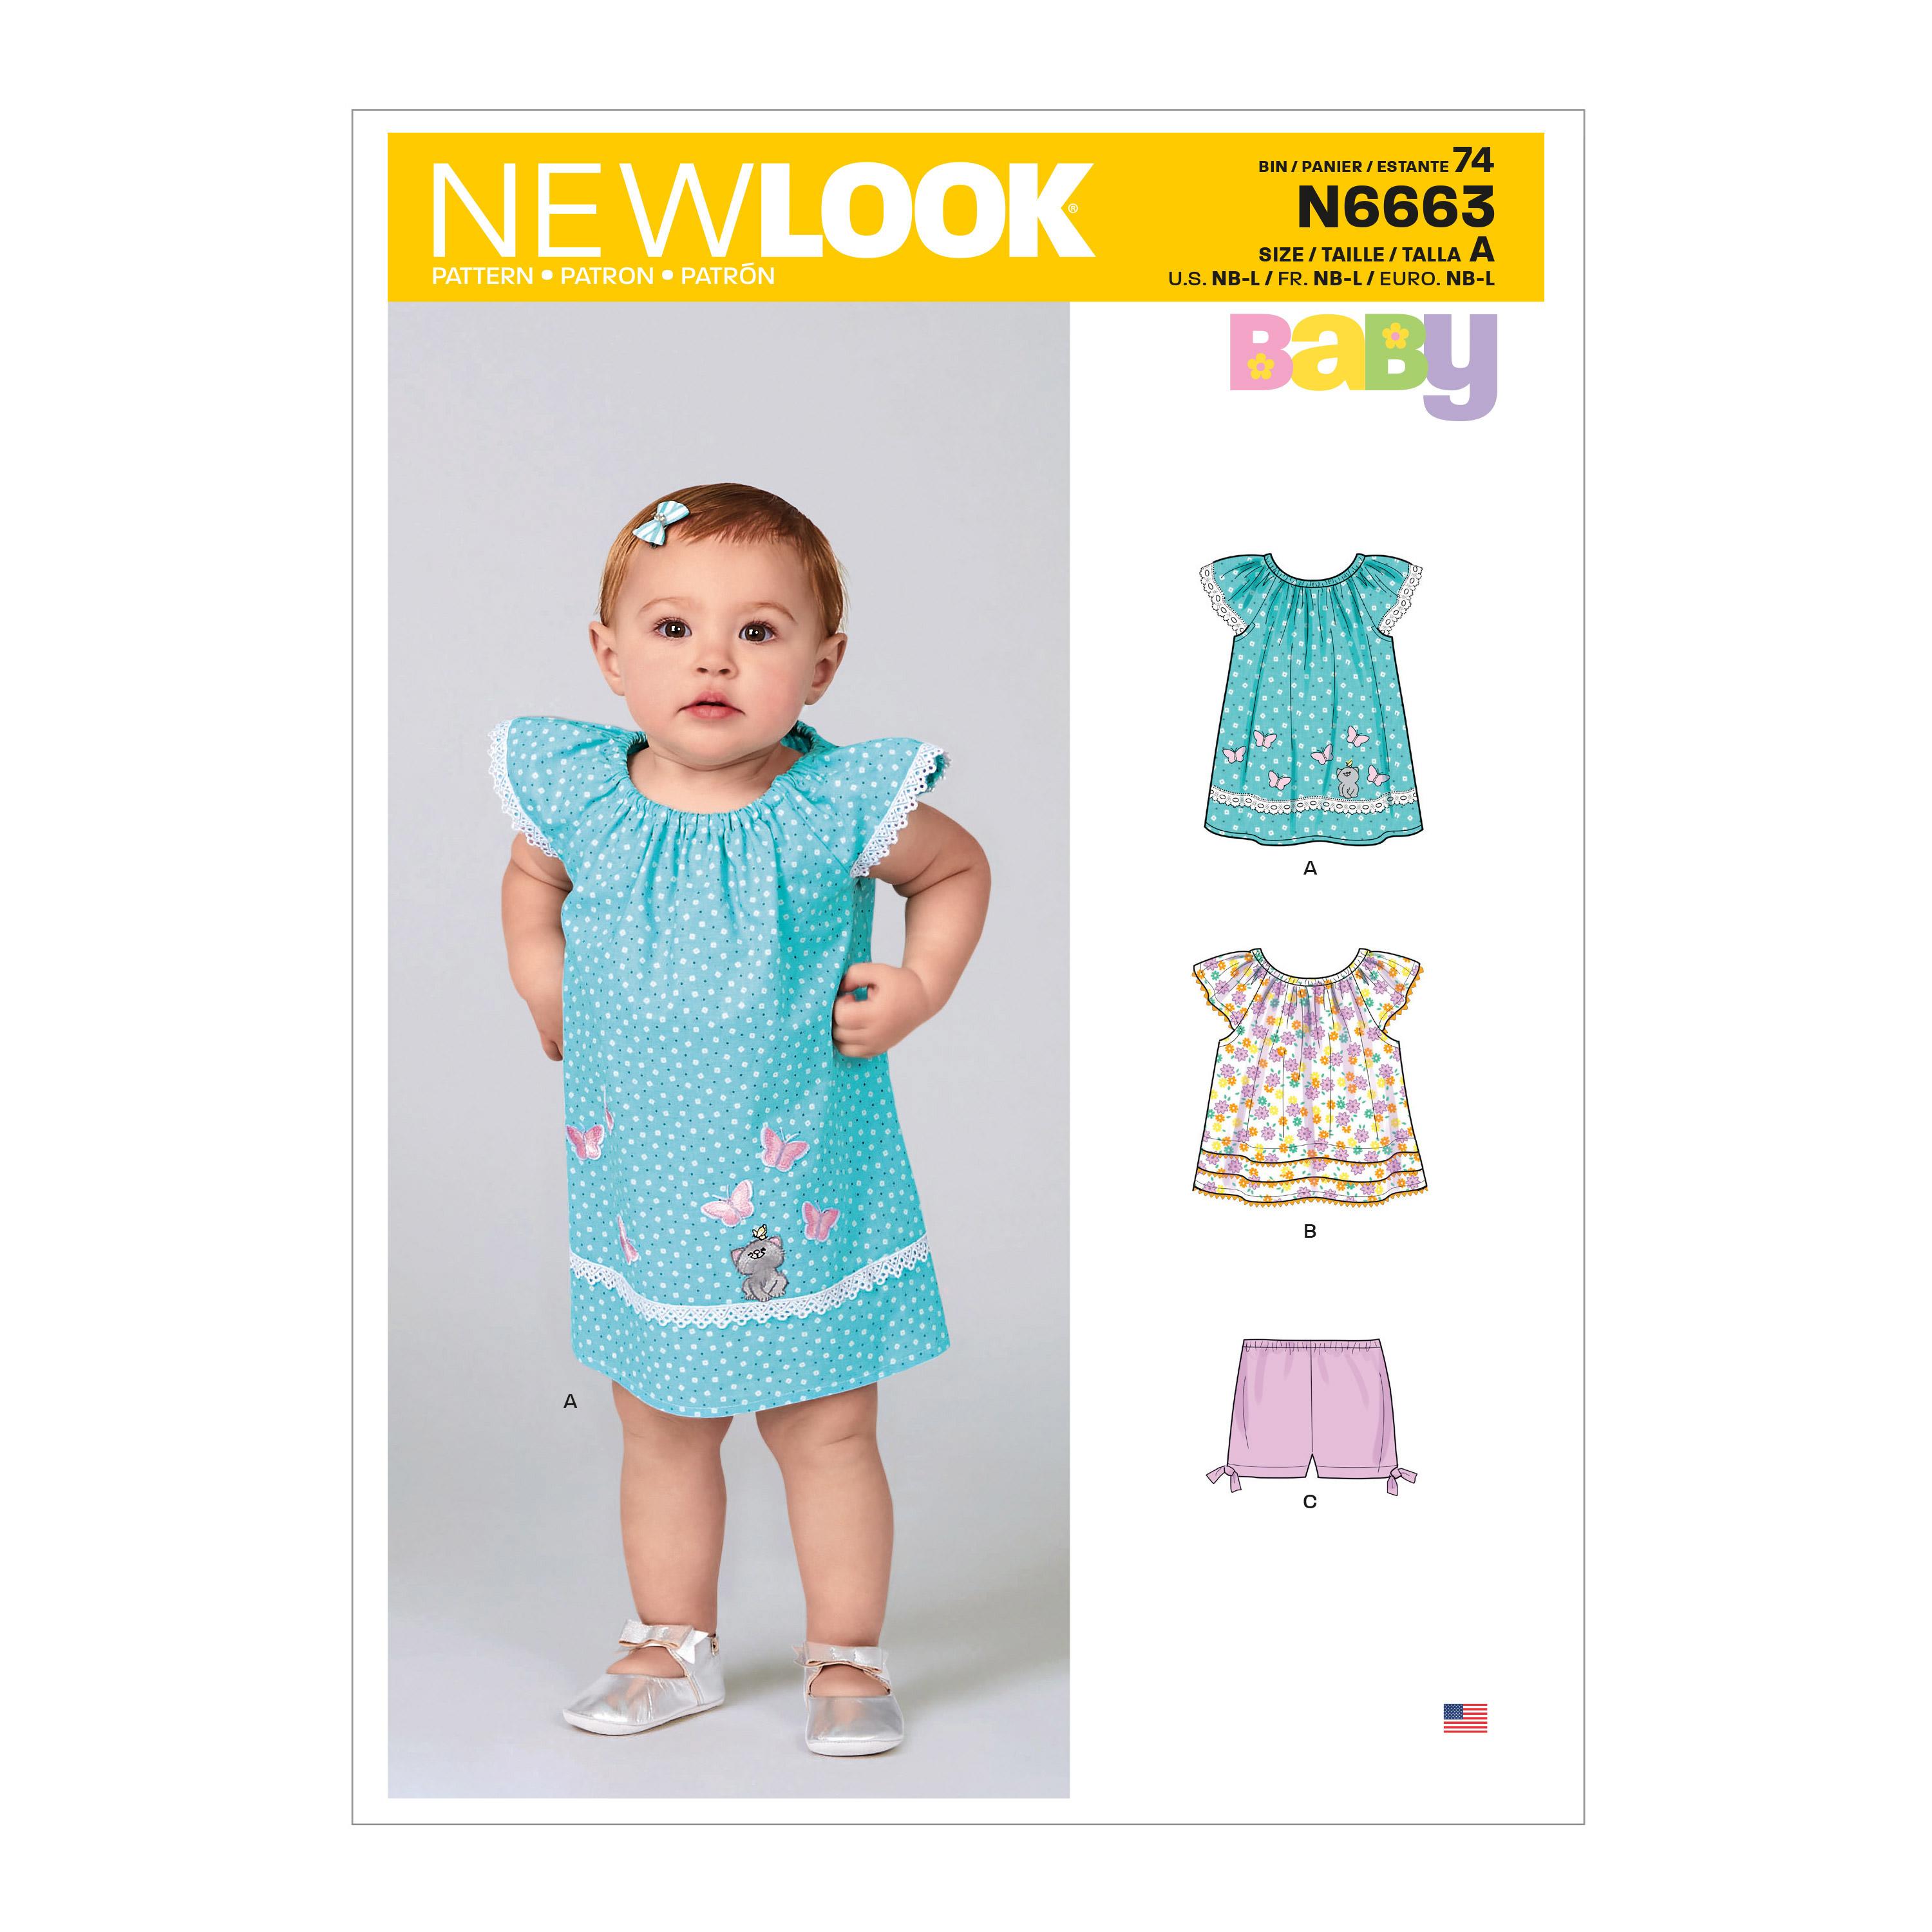 New Look Sewing Pattern N6663 Infants' Dress, Top With Appliques & Trims & Pants With Bows At Hem